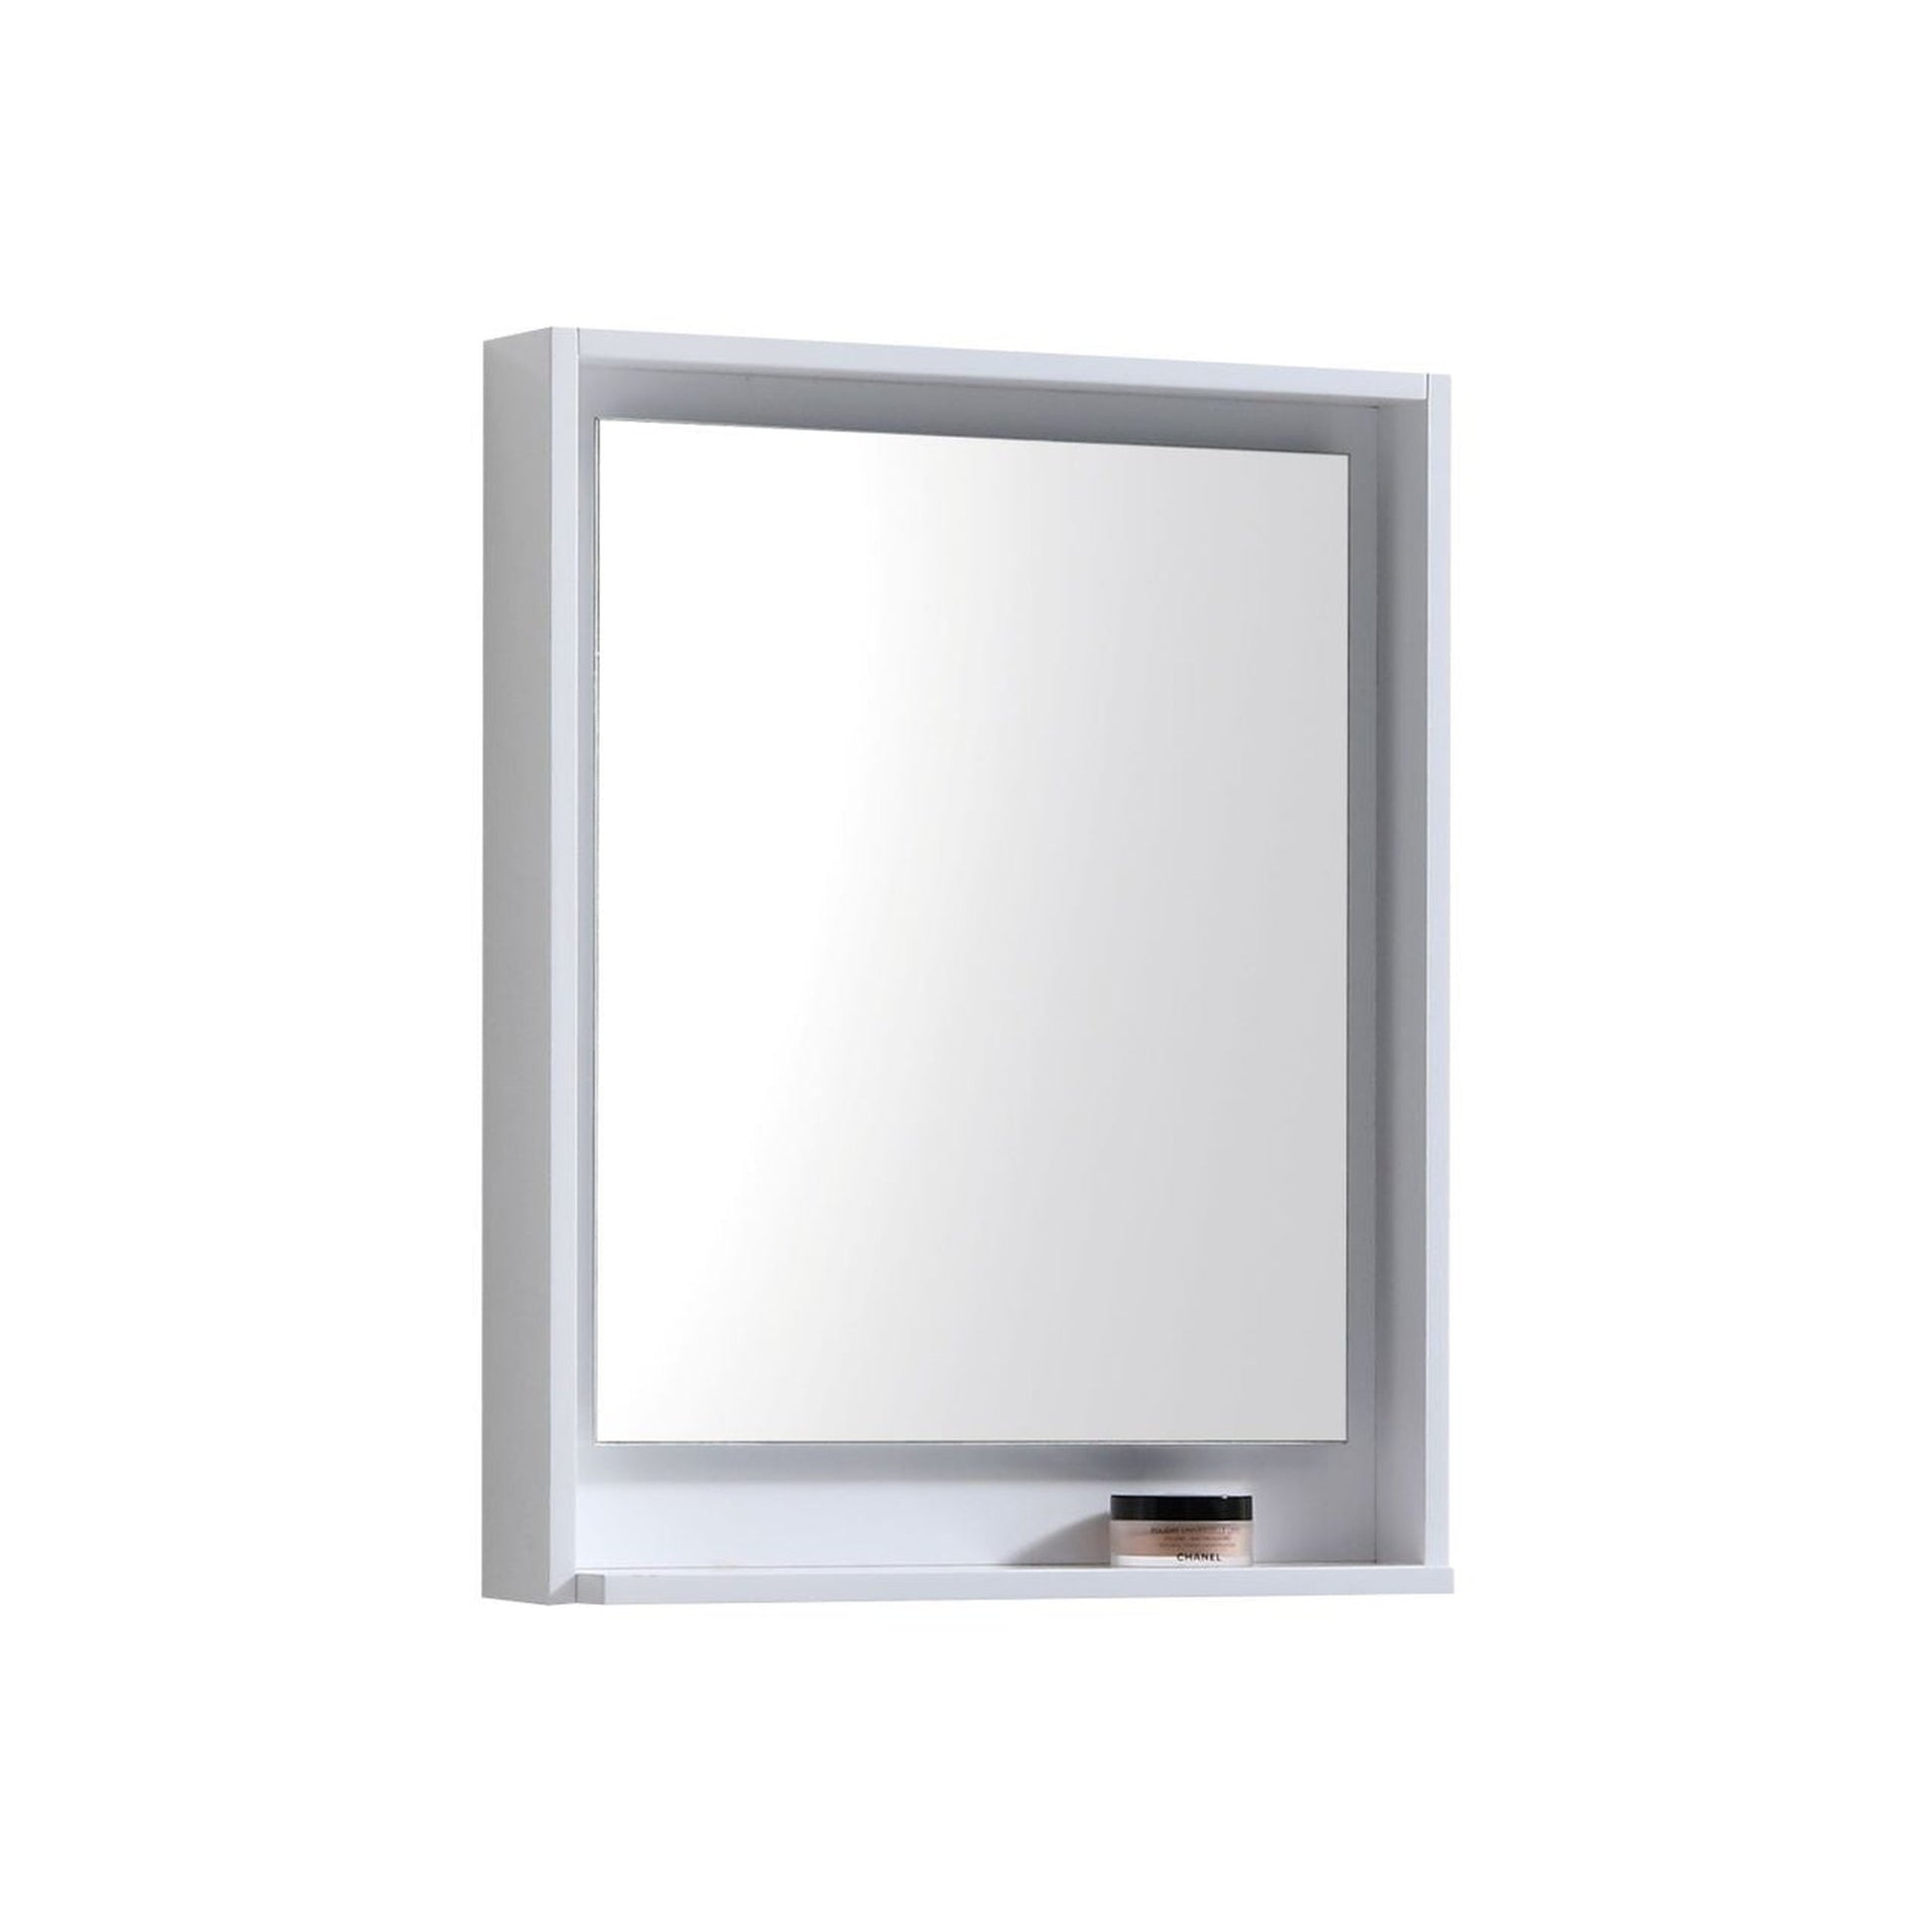 KubeBath Bliss 16" High Gloss White Wall-Mounted Modern Bathroom Vanity With Single Integrated Acrylic Sink With Overflow and 24" White Framed Mirror With Shelf